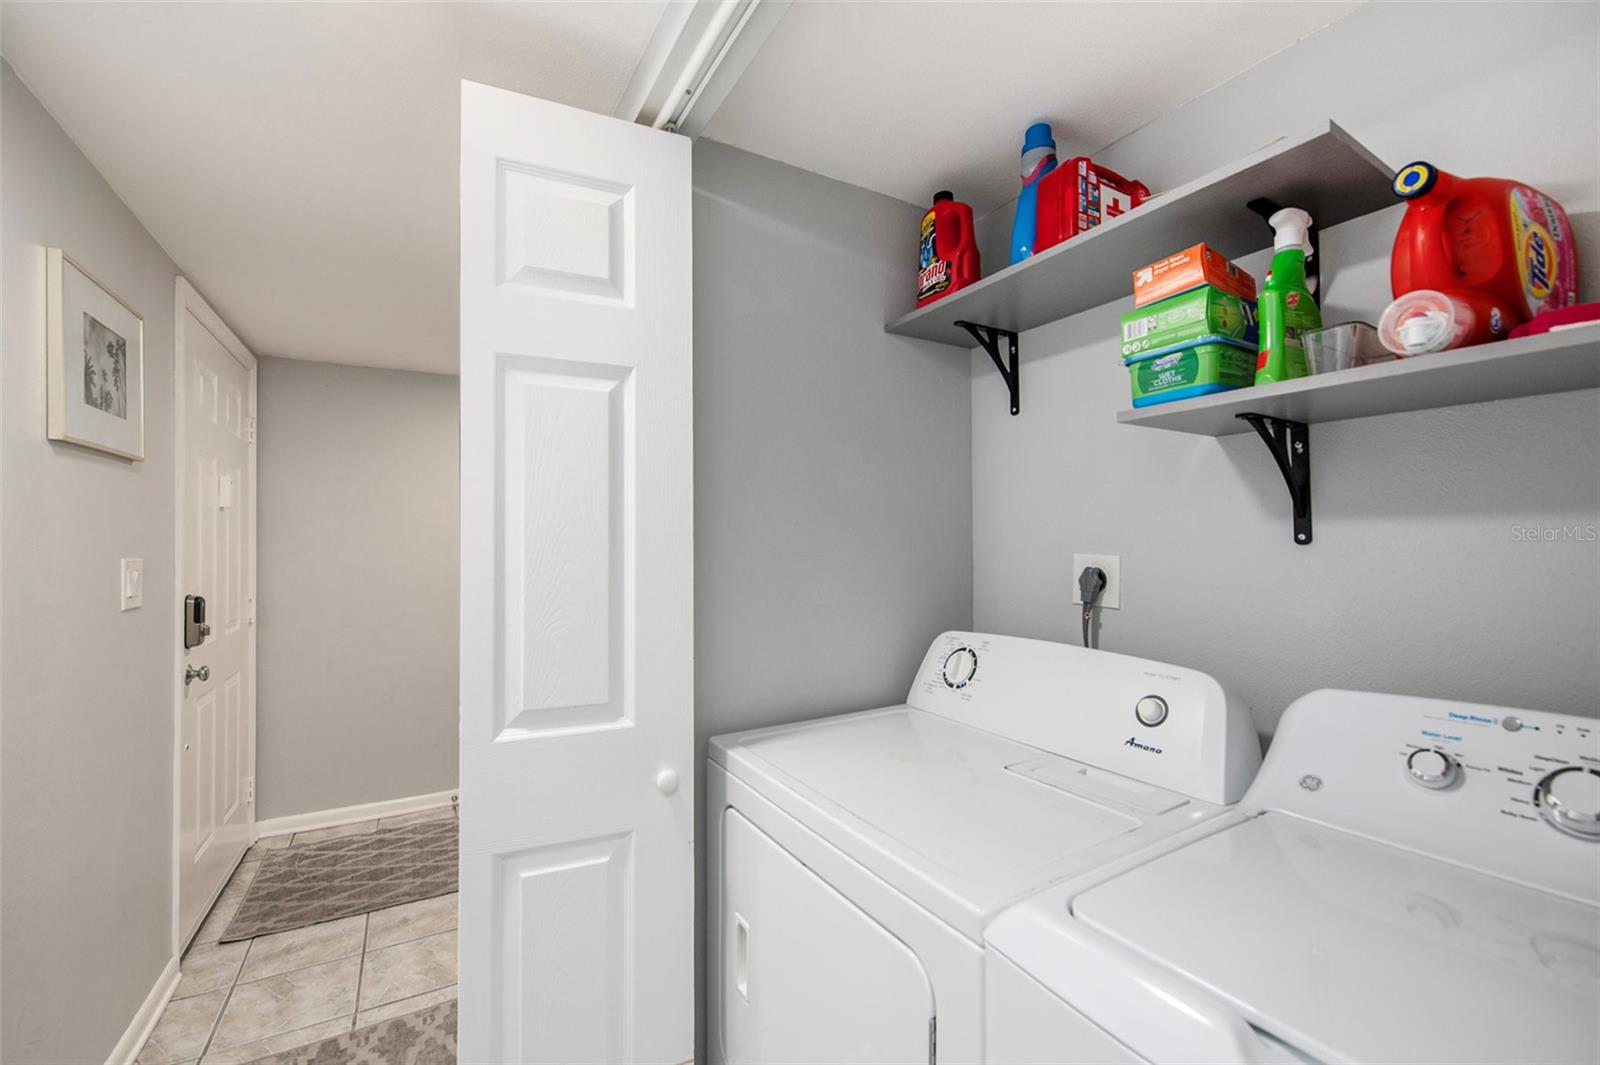 Laundry is located in the home’s front hallway near the second bedroom